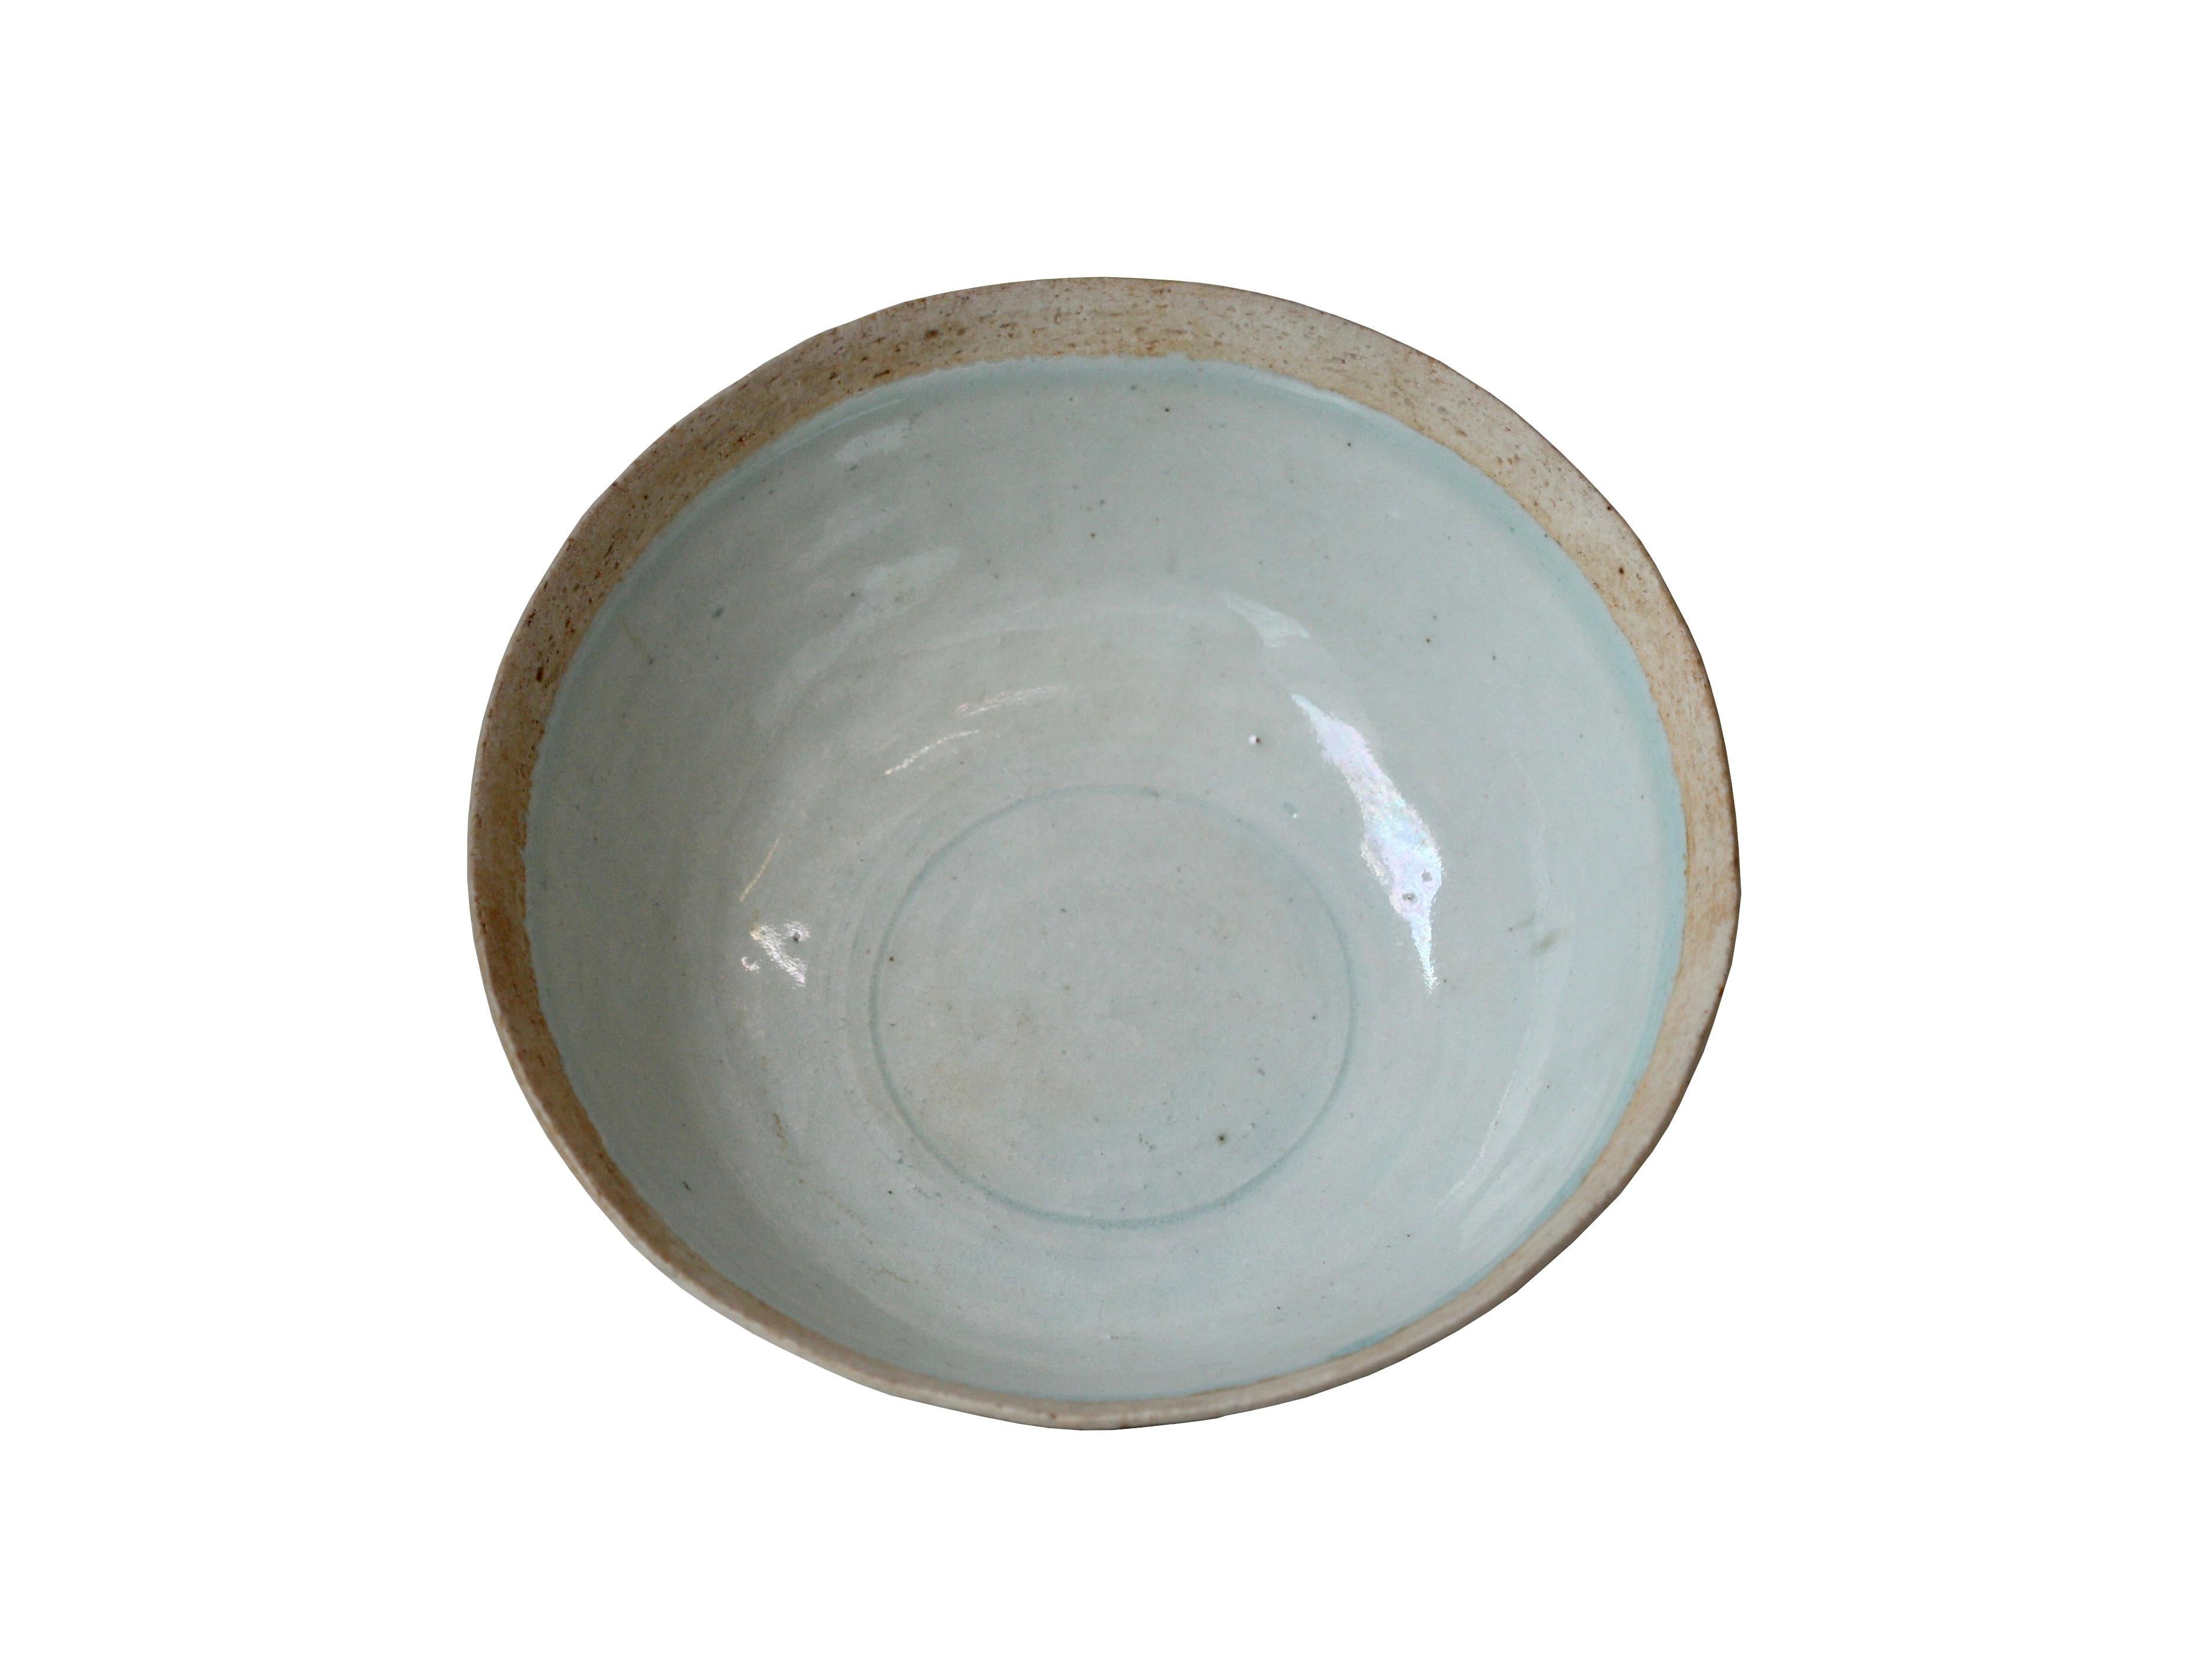 A Qinqbai lobed conical bowl, Chinese,
probably Song Dynasty
Measures: Height 1 in. (2.54 cm.), diameter 5.06 in. (12.85 cm.)
  